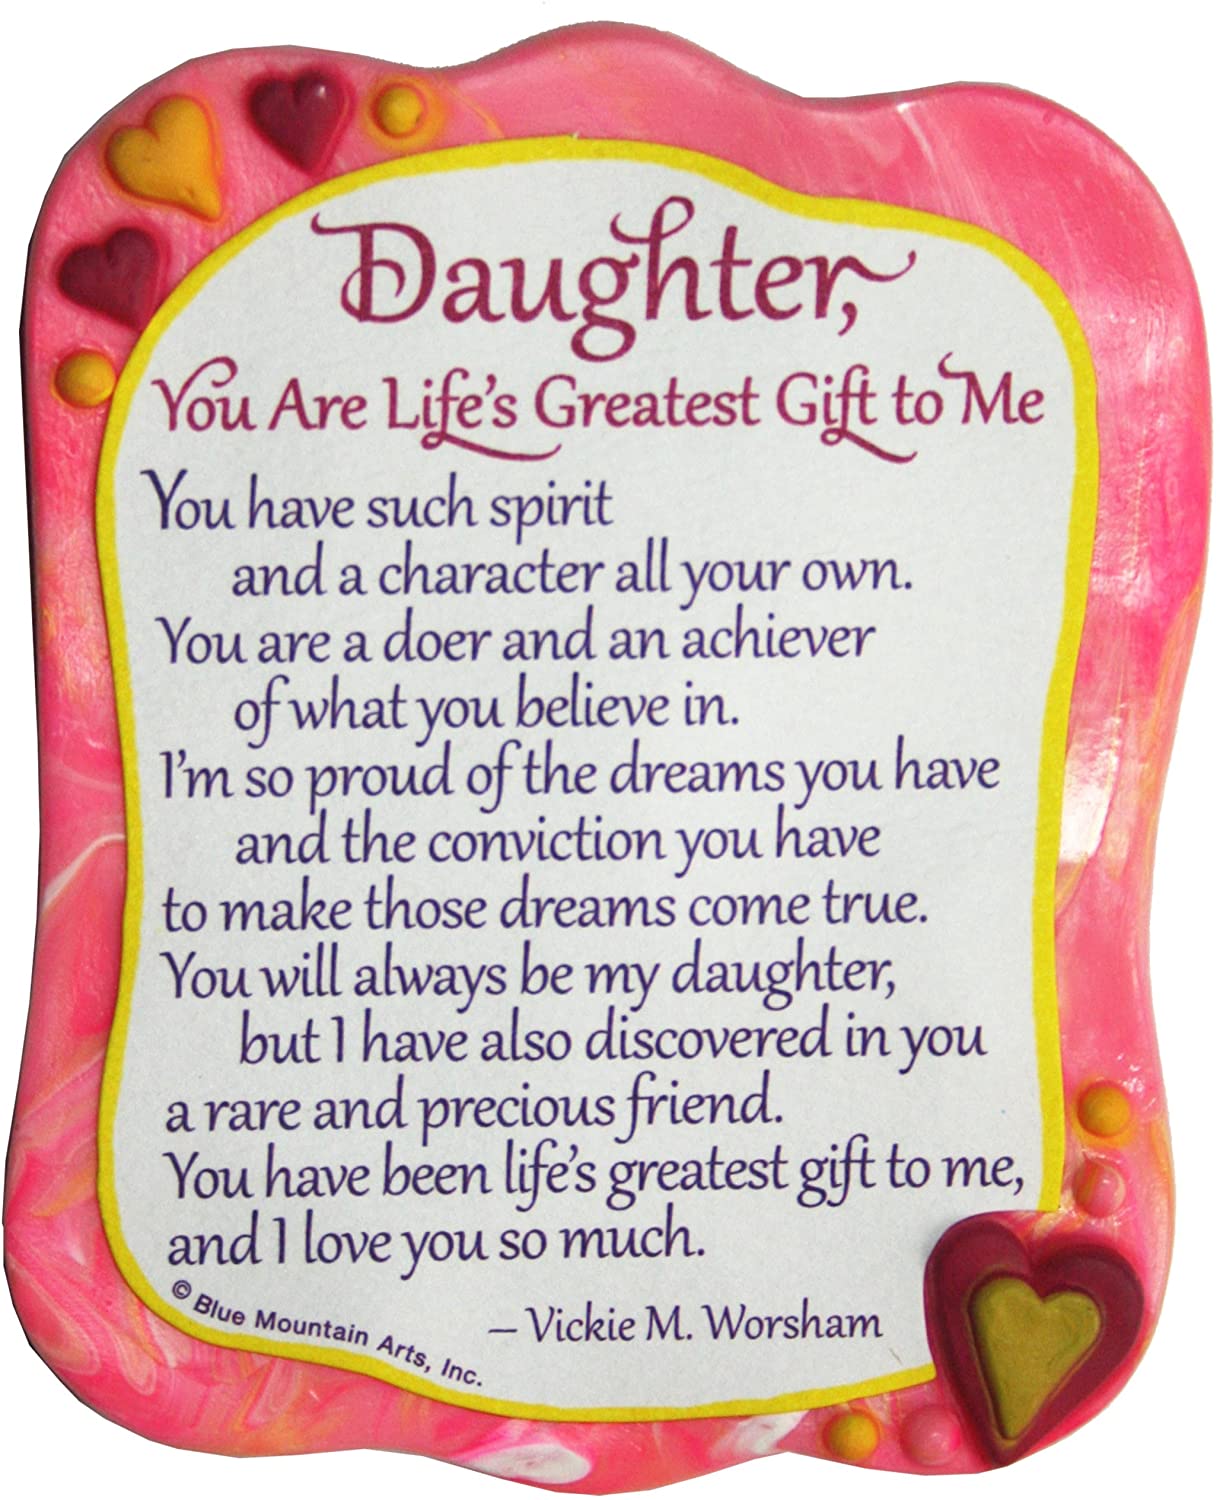 Daughter, You Are Life's Greatest Gift To Me (MR919) - Blue Mountain Arts